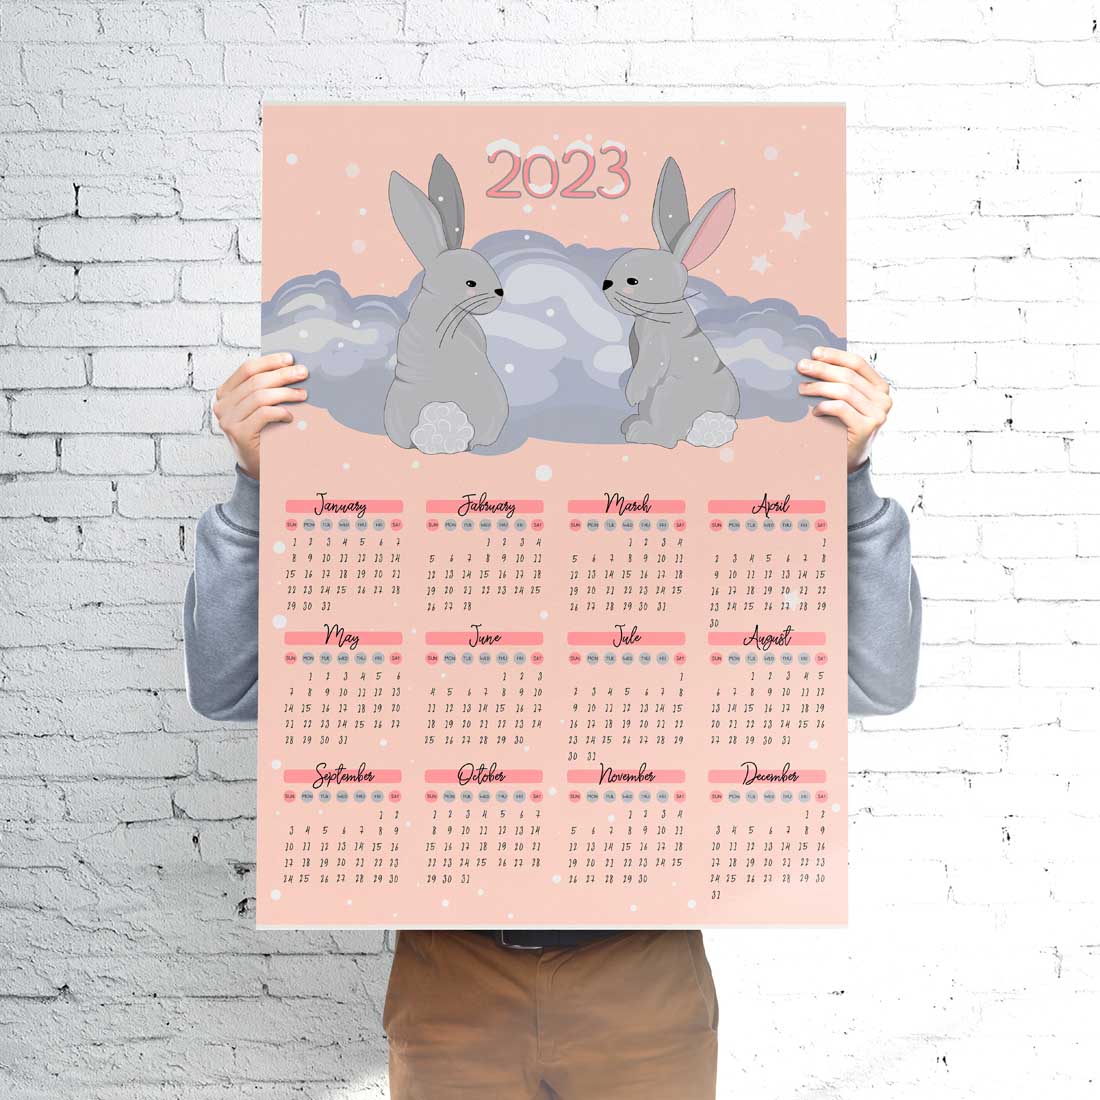 Calendar 2023 with Cute Rabbits previews.